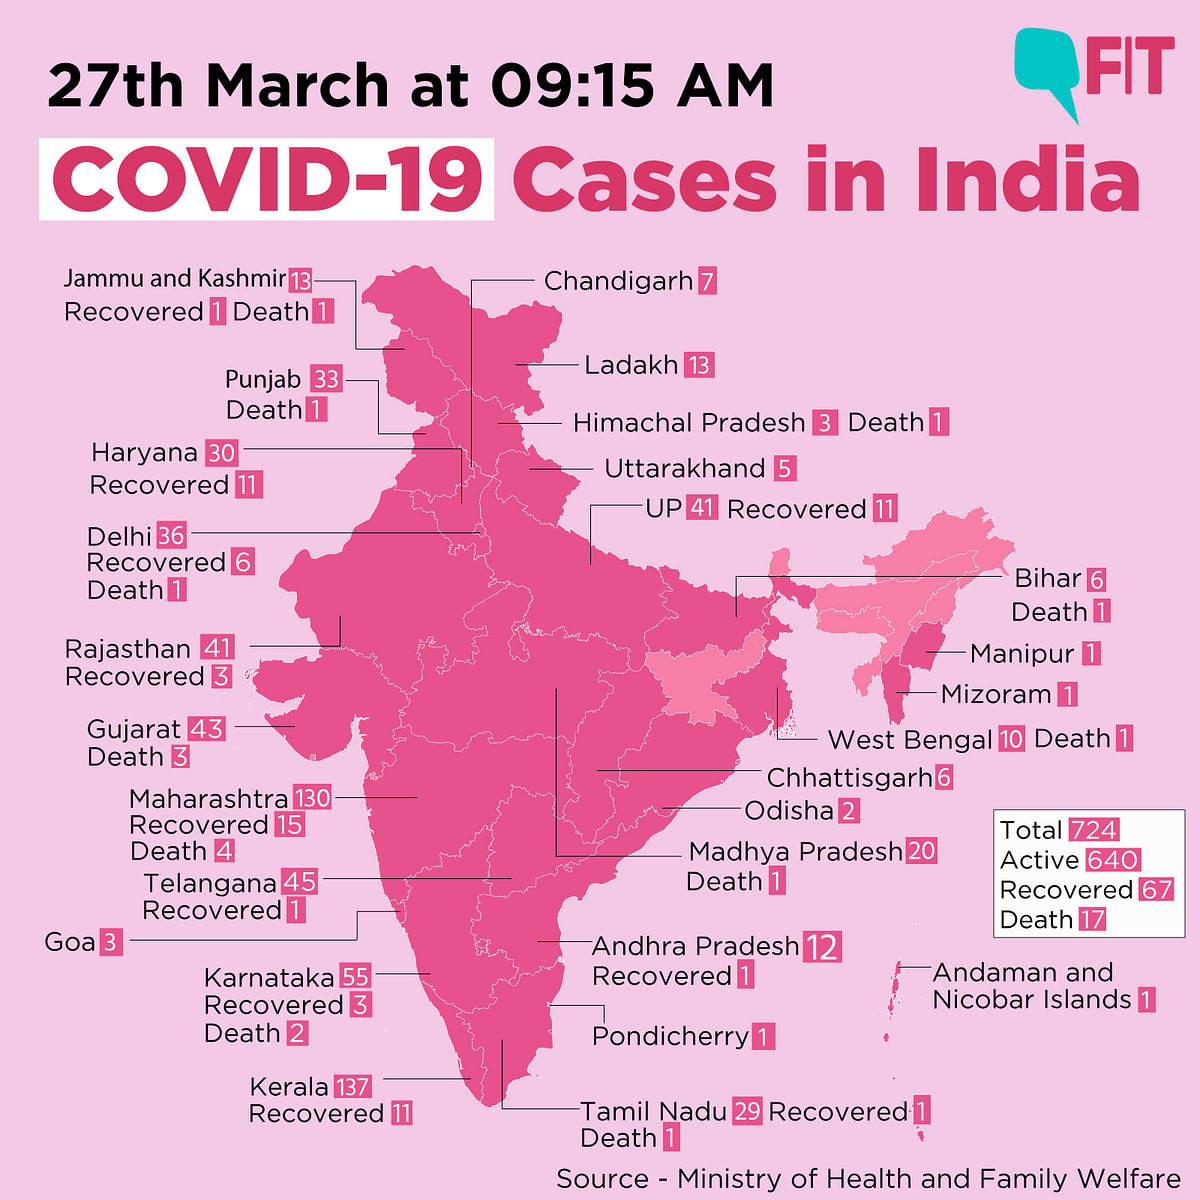 COVID-19 India Updates: Cases Climb to 724, Says Health Ministry